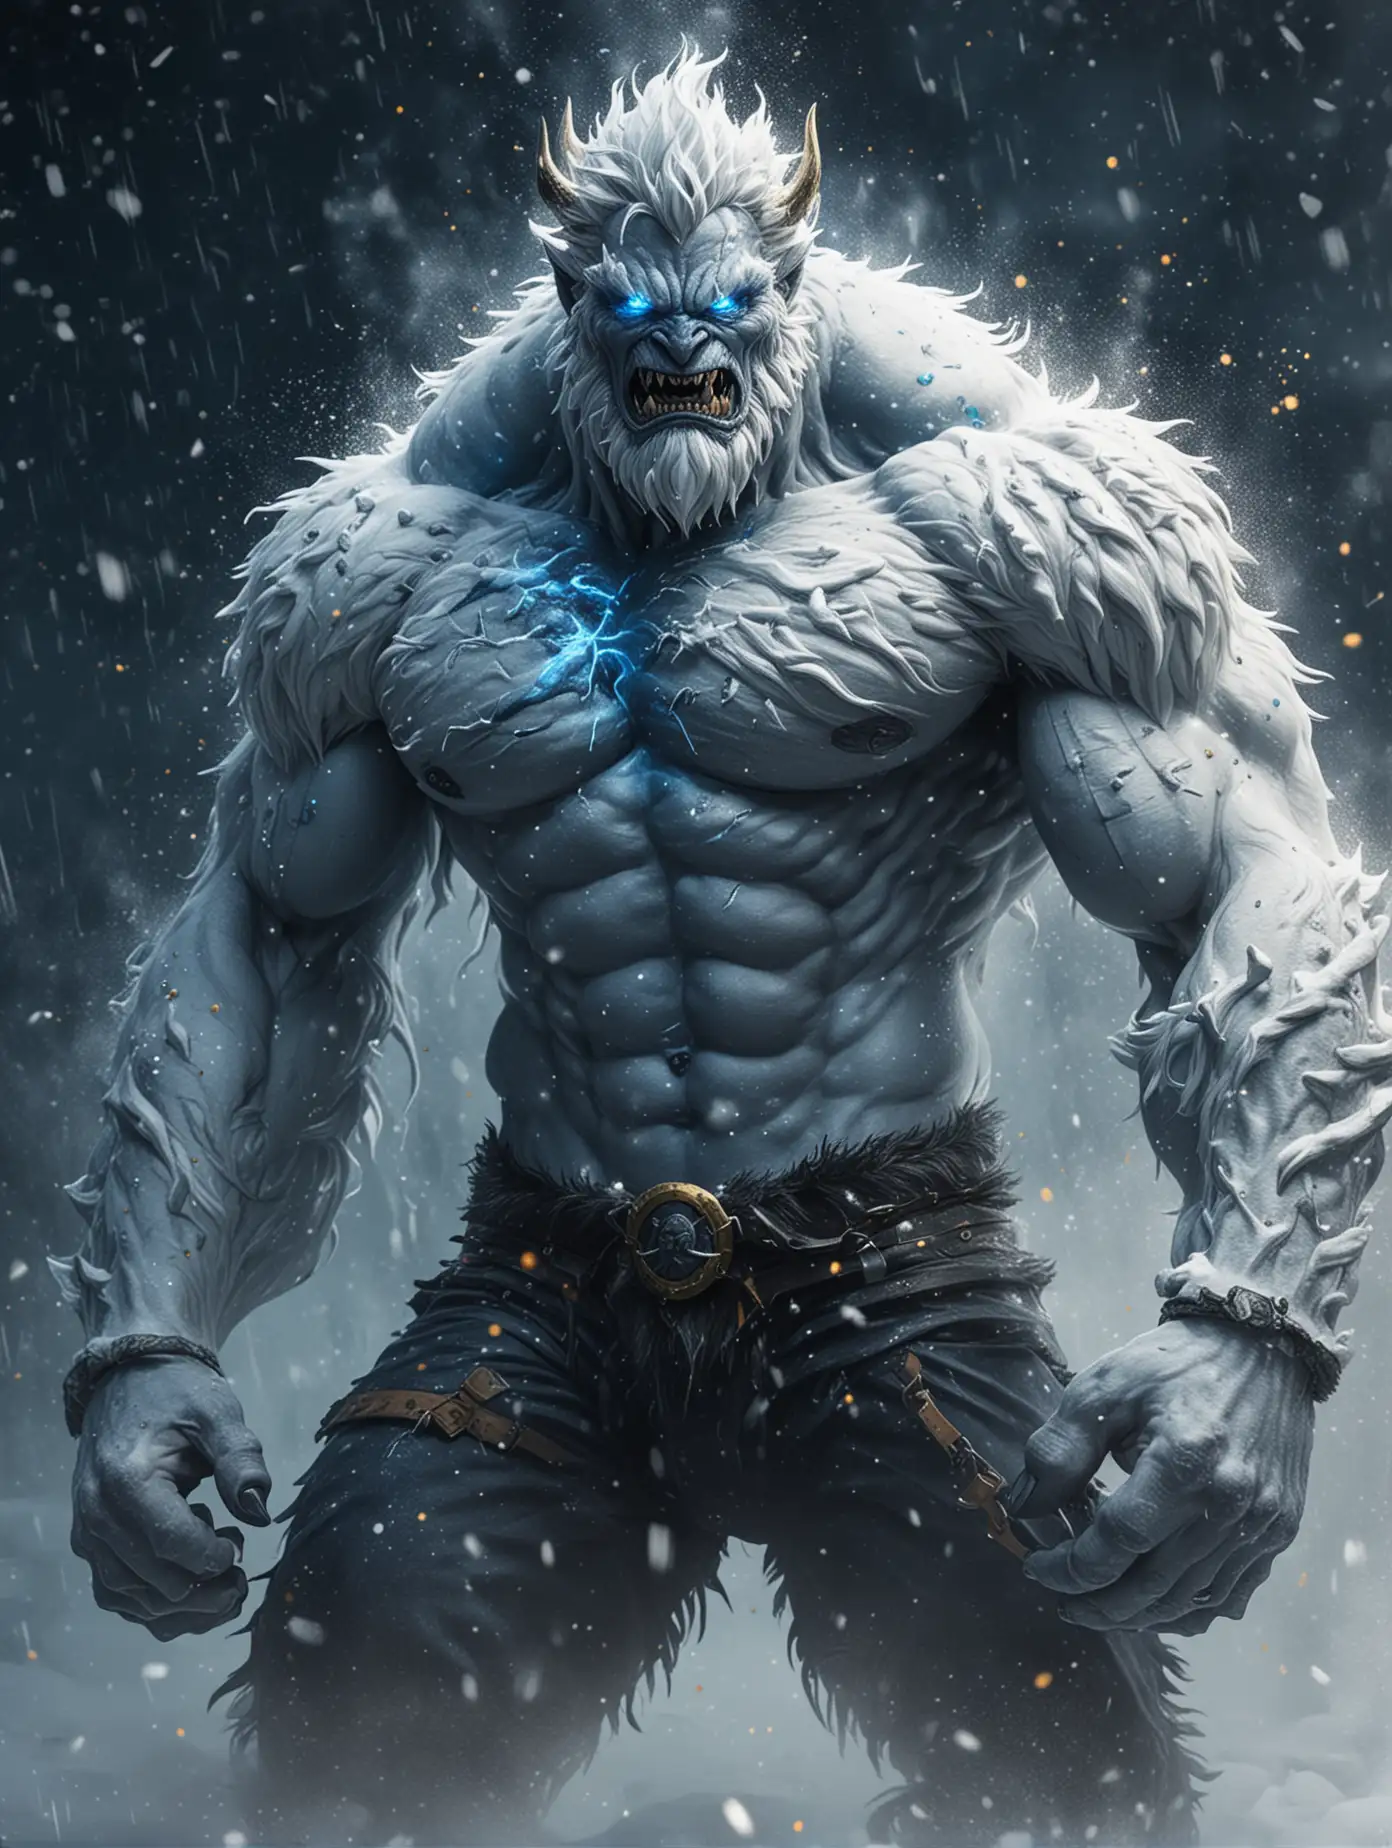 Handsome Shirtless Snow Beast Monster with Blue and Black Fog